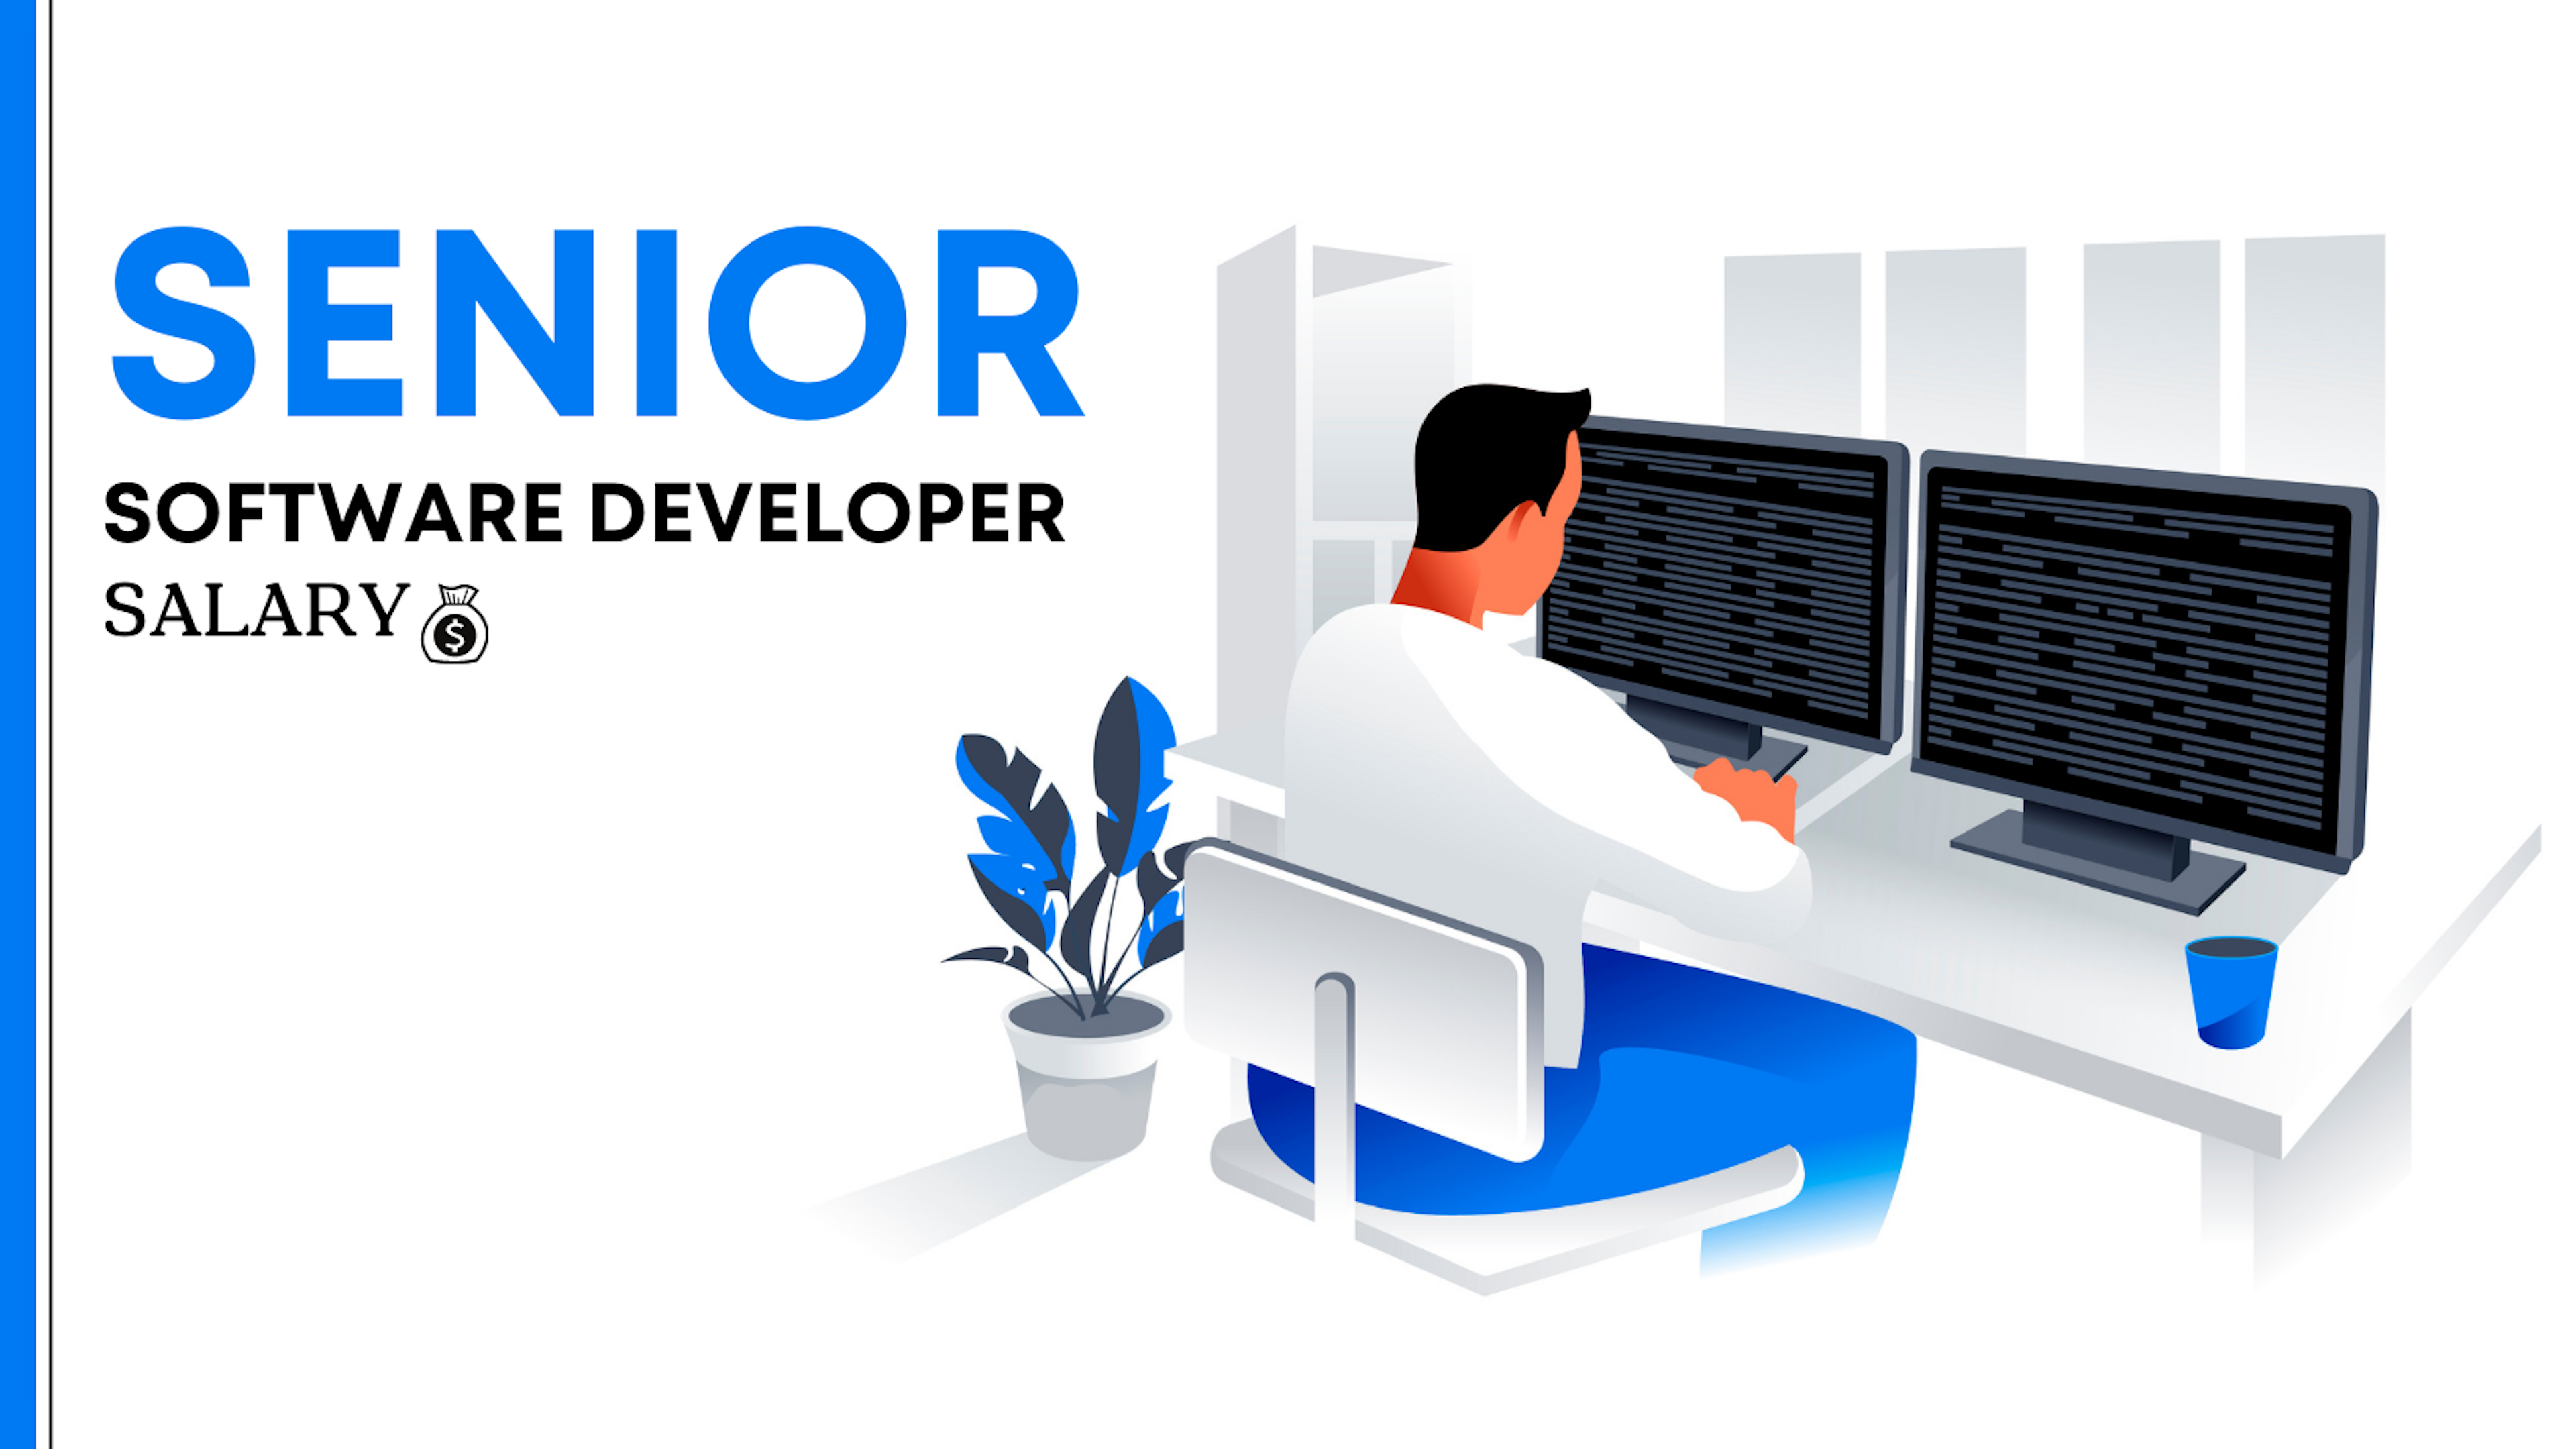 Senior Software Developer Salary | What to Expect?